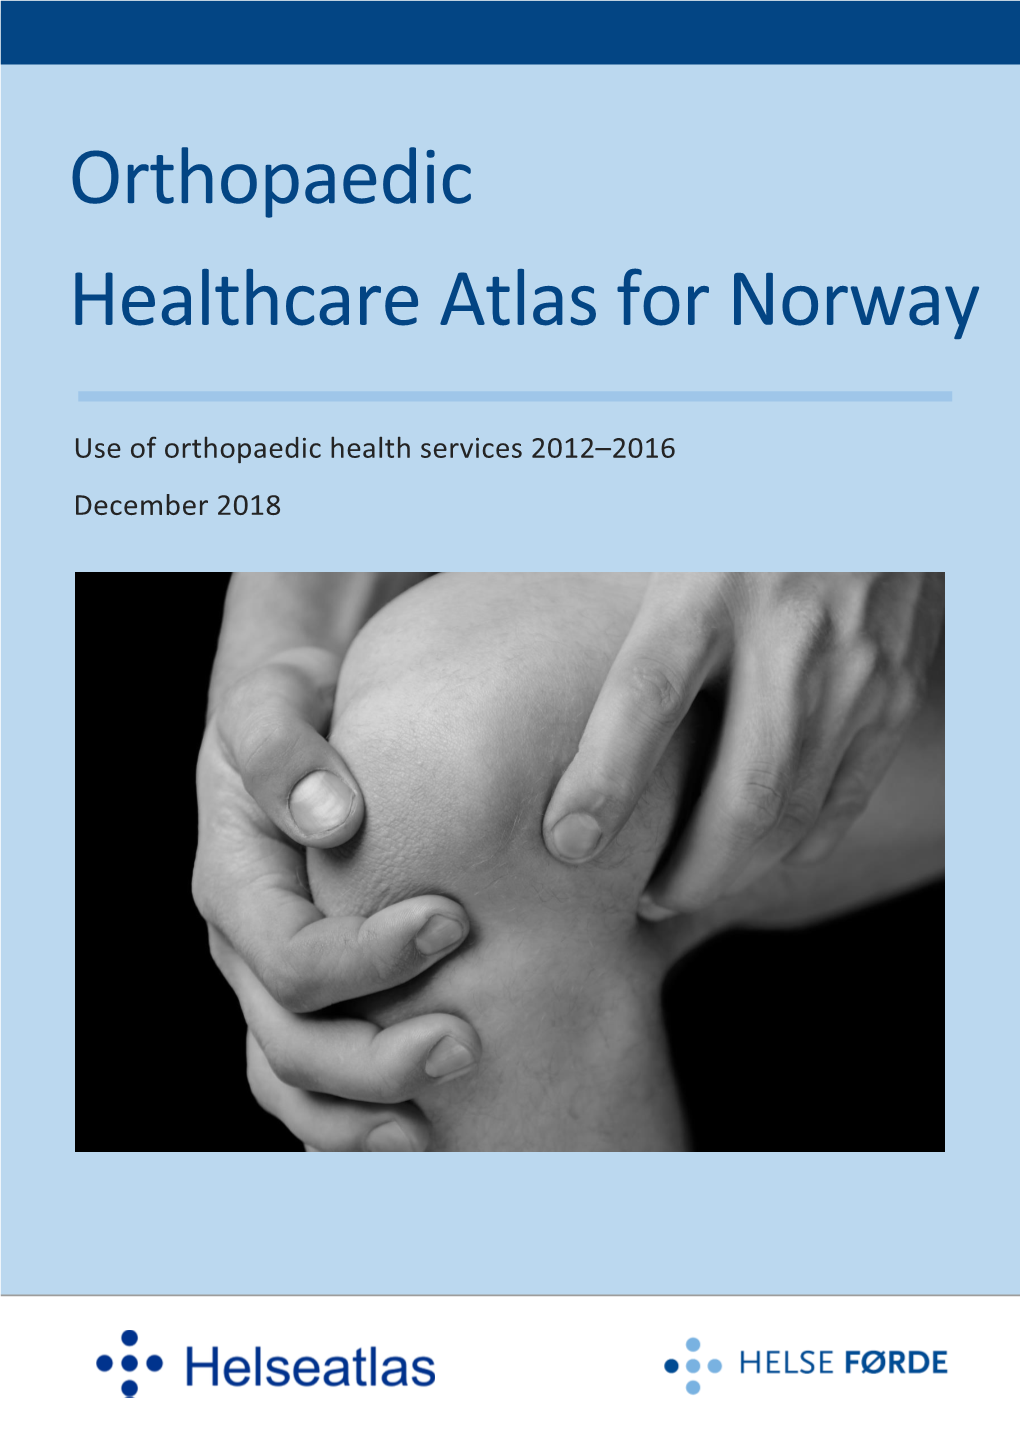 Orthopaedic Healthcare Atlas for Norway Is the Rst Healthcare Atlas to Be Produced by Western Norway Regional Health Authority